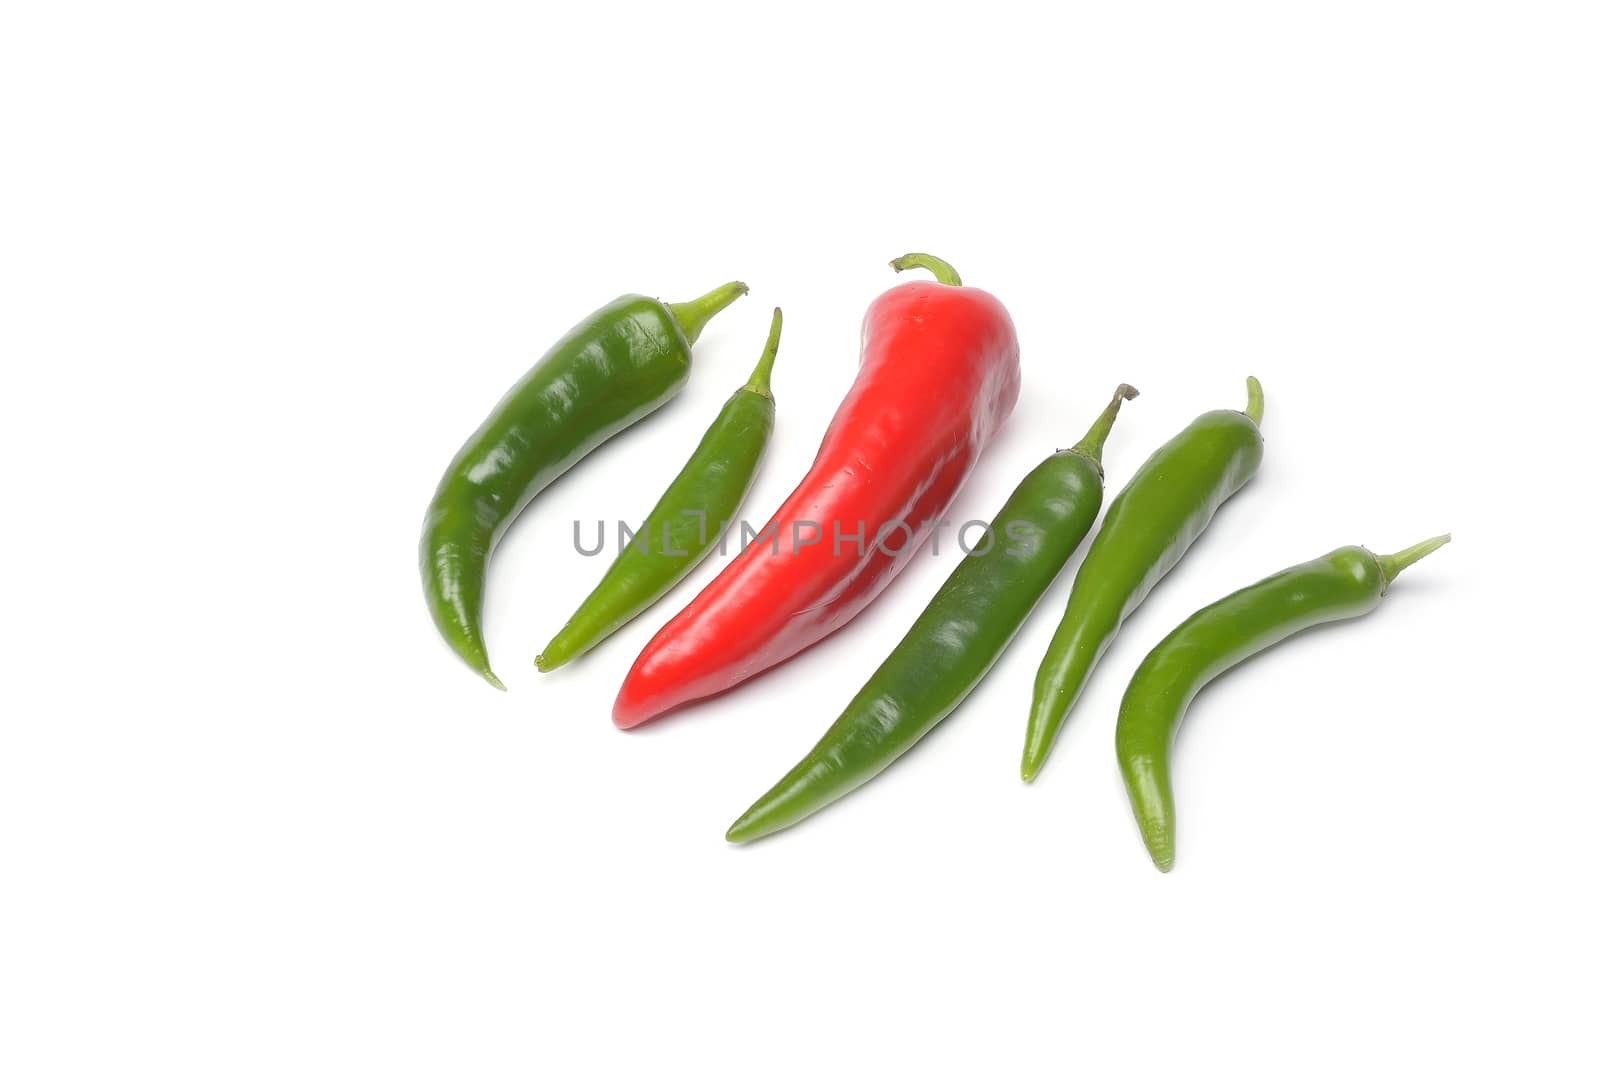 Some red and green hot peppers on a white background by constantinhurghea